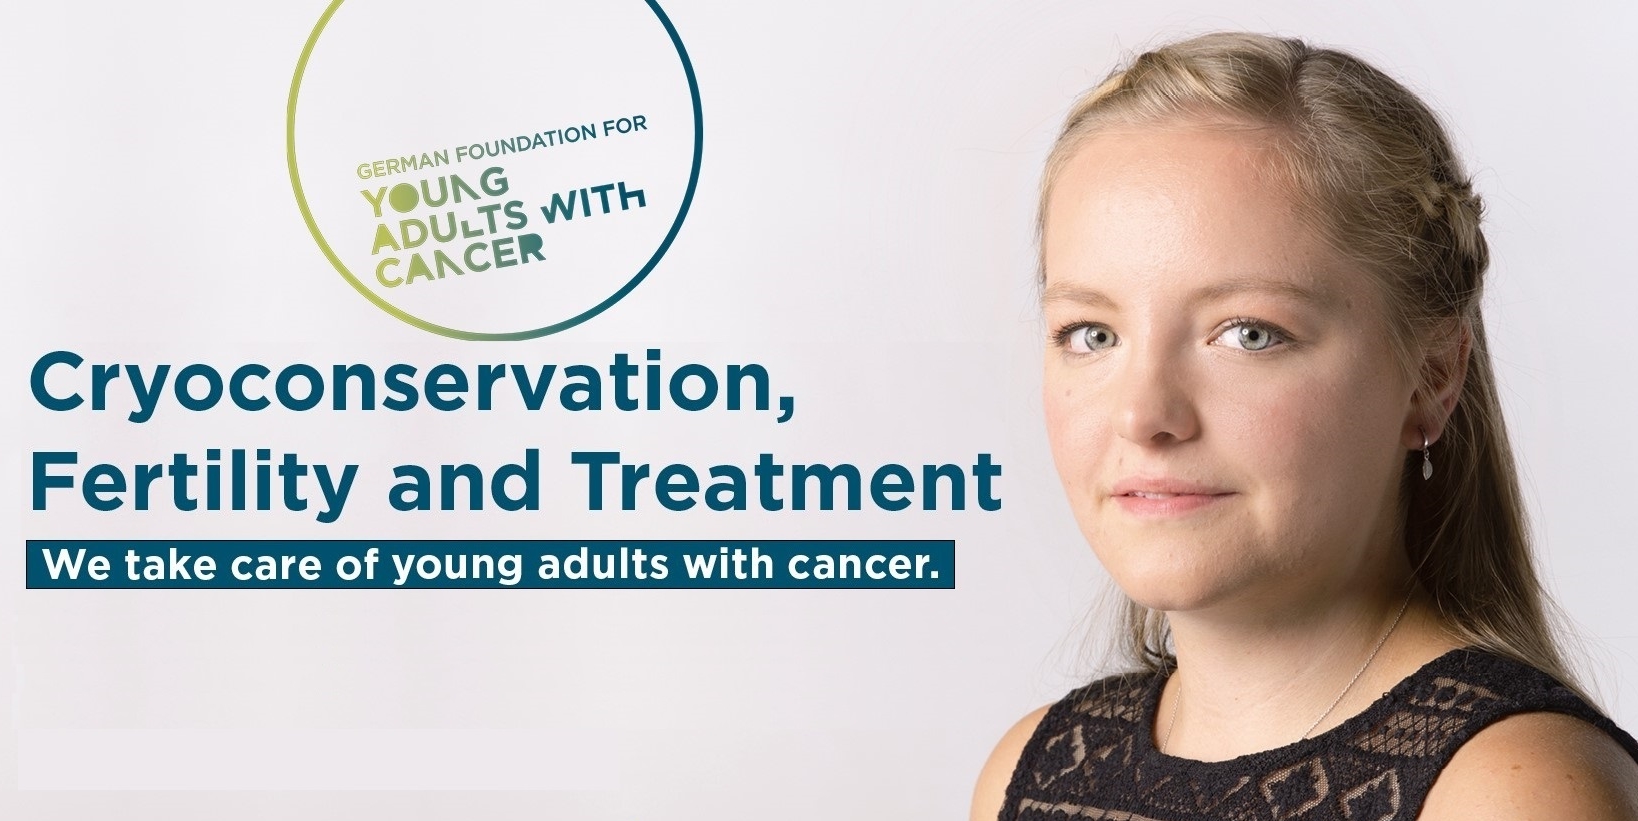 Fertility Preservation in Young Cancer Patients: An Interview with Inken Hilgendorf